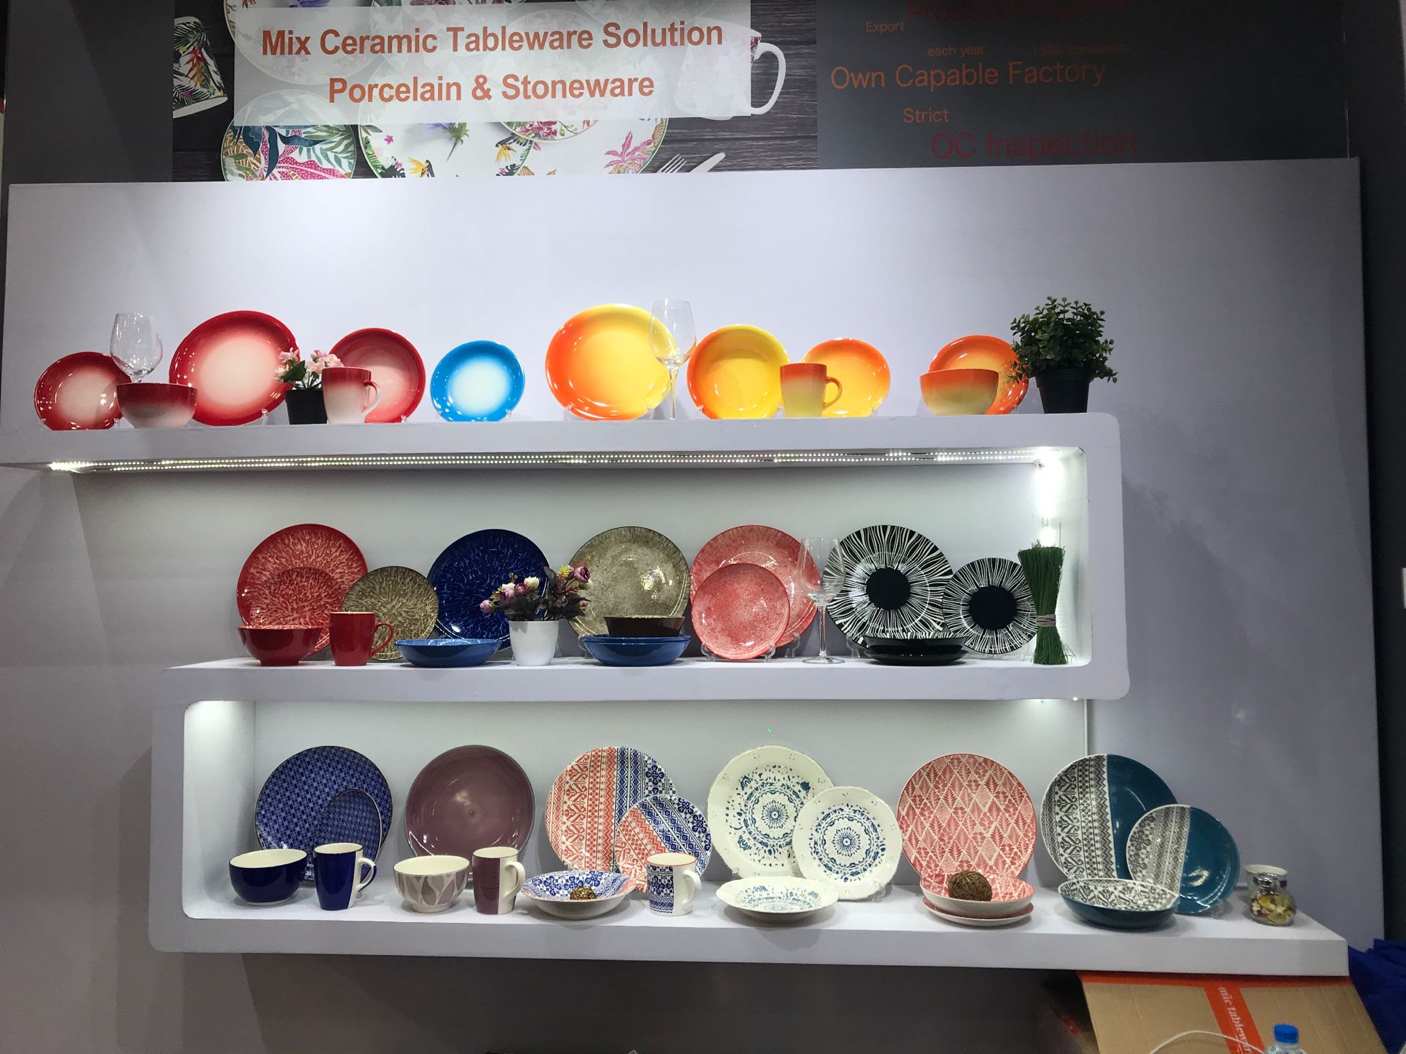 New product launches at the 130th Canton Fair – Day 2